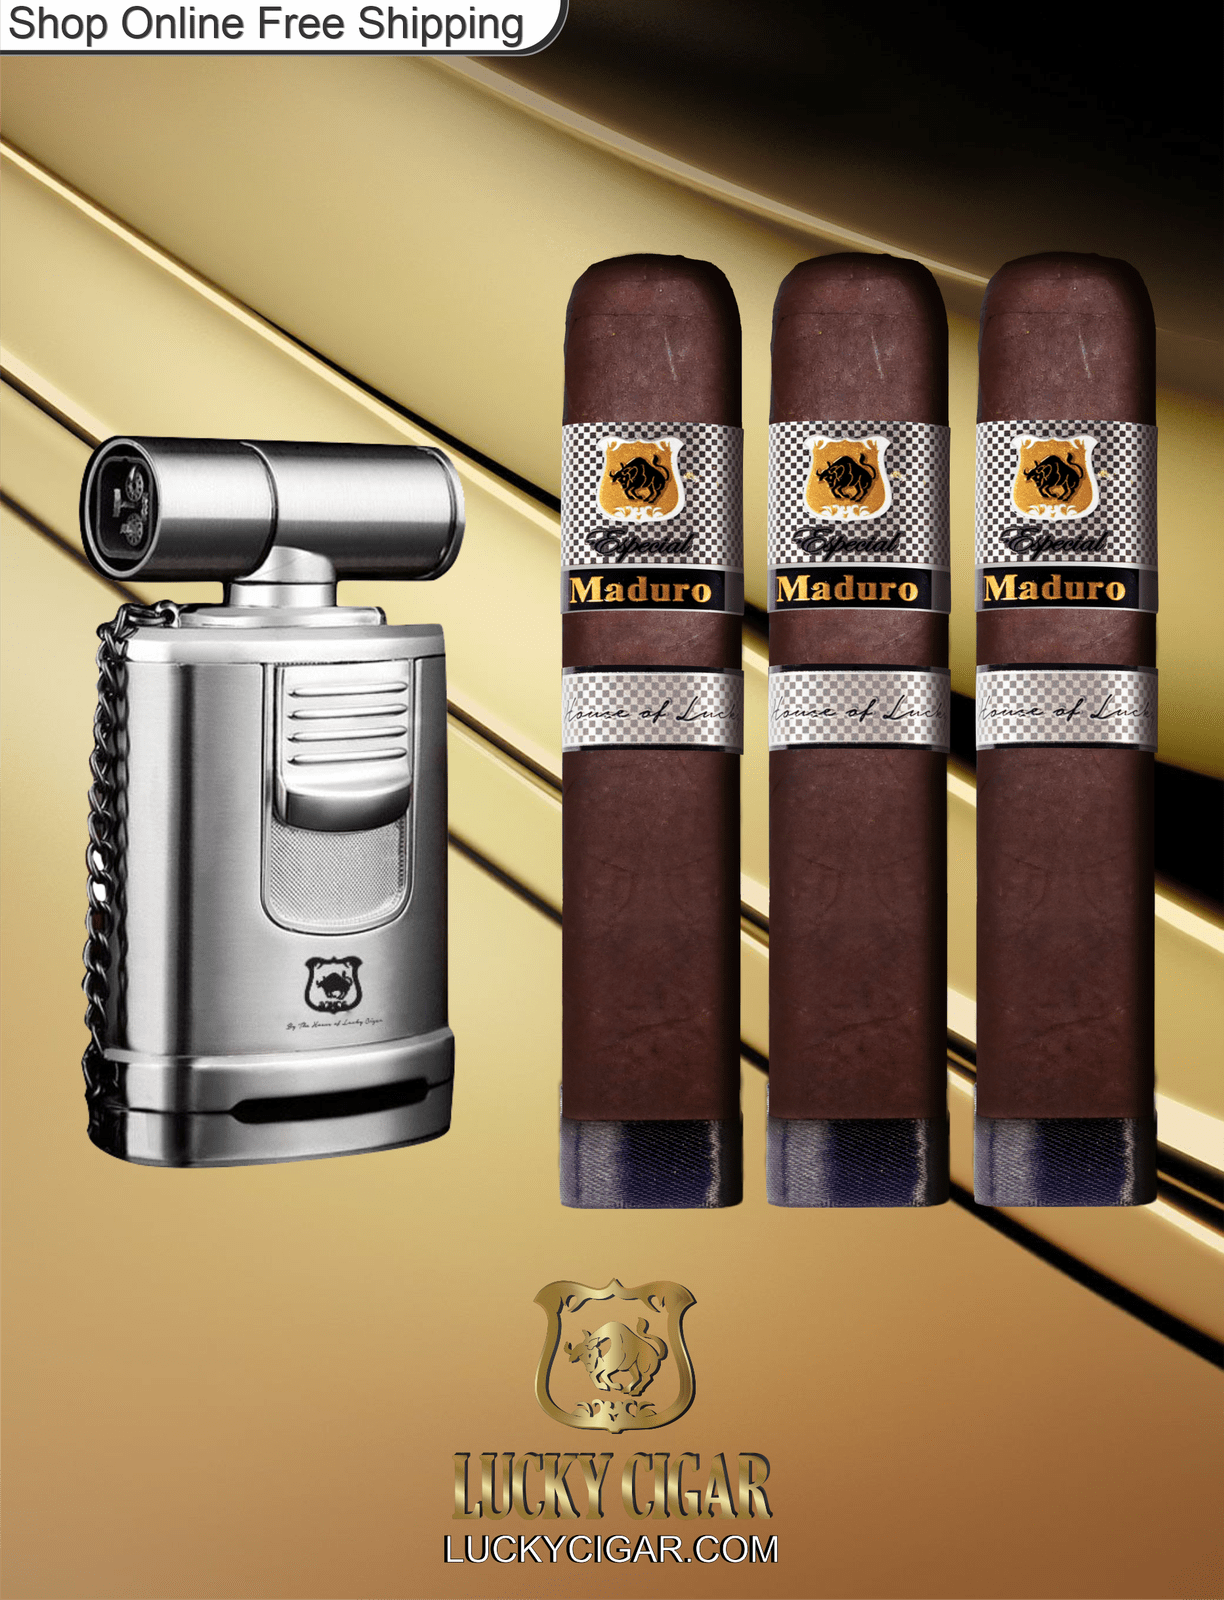 Lucky Cigar Sampler Sets: Set of 3 Especial Maduro Robusto Cigars with Torch